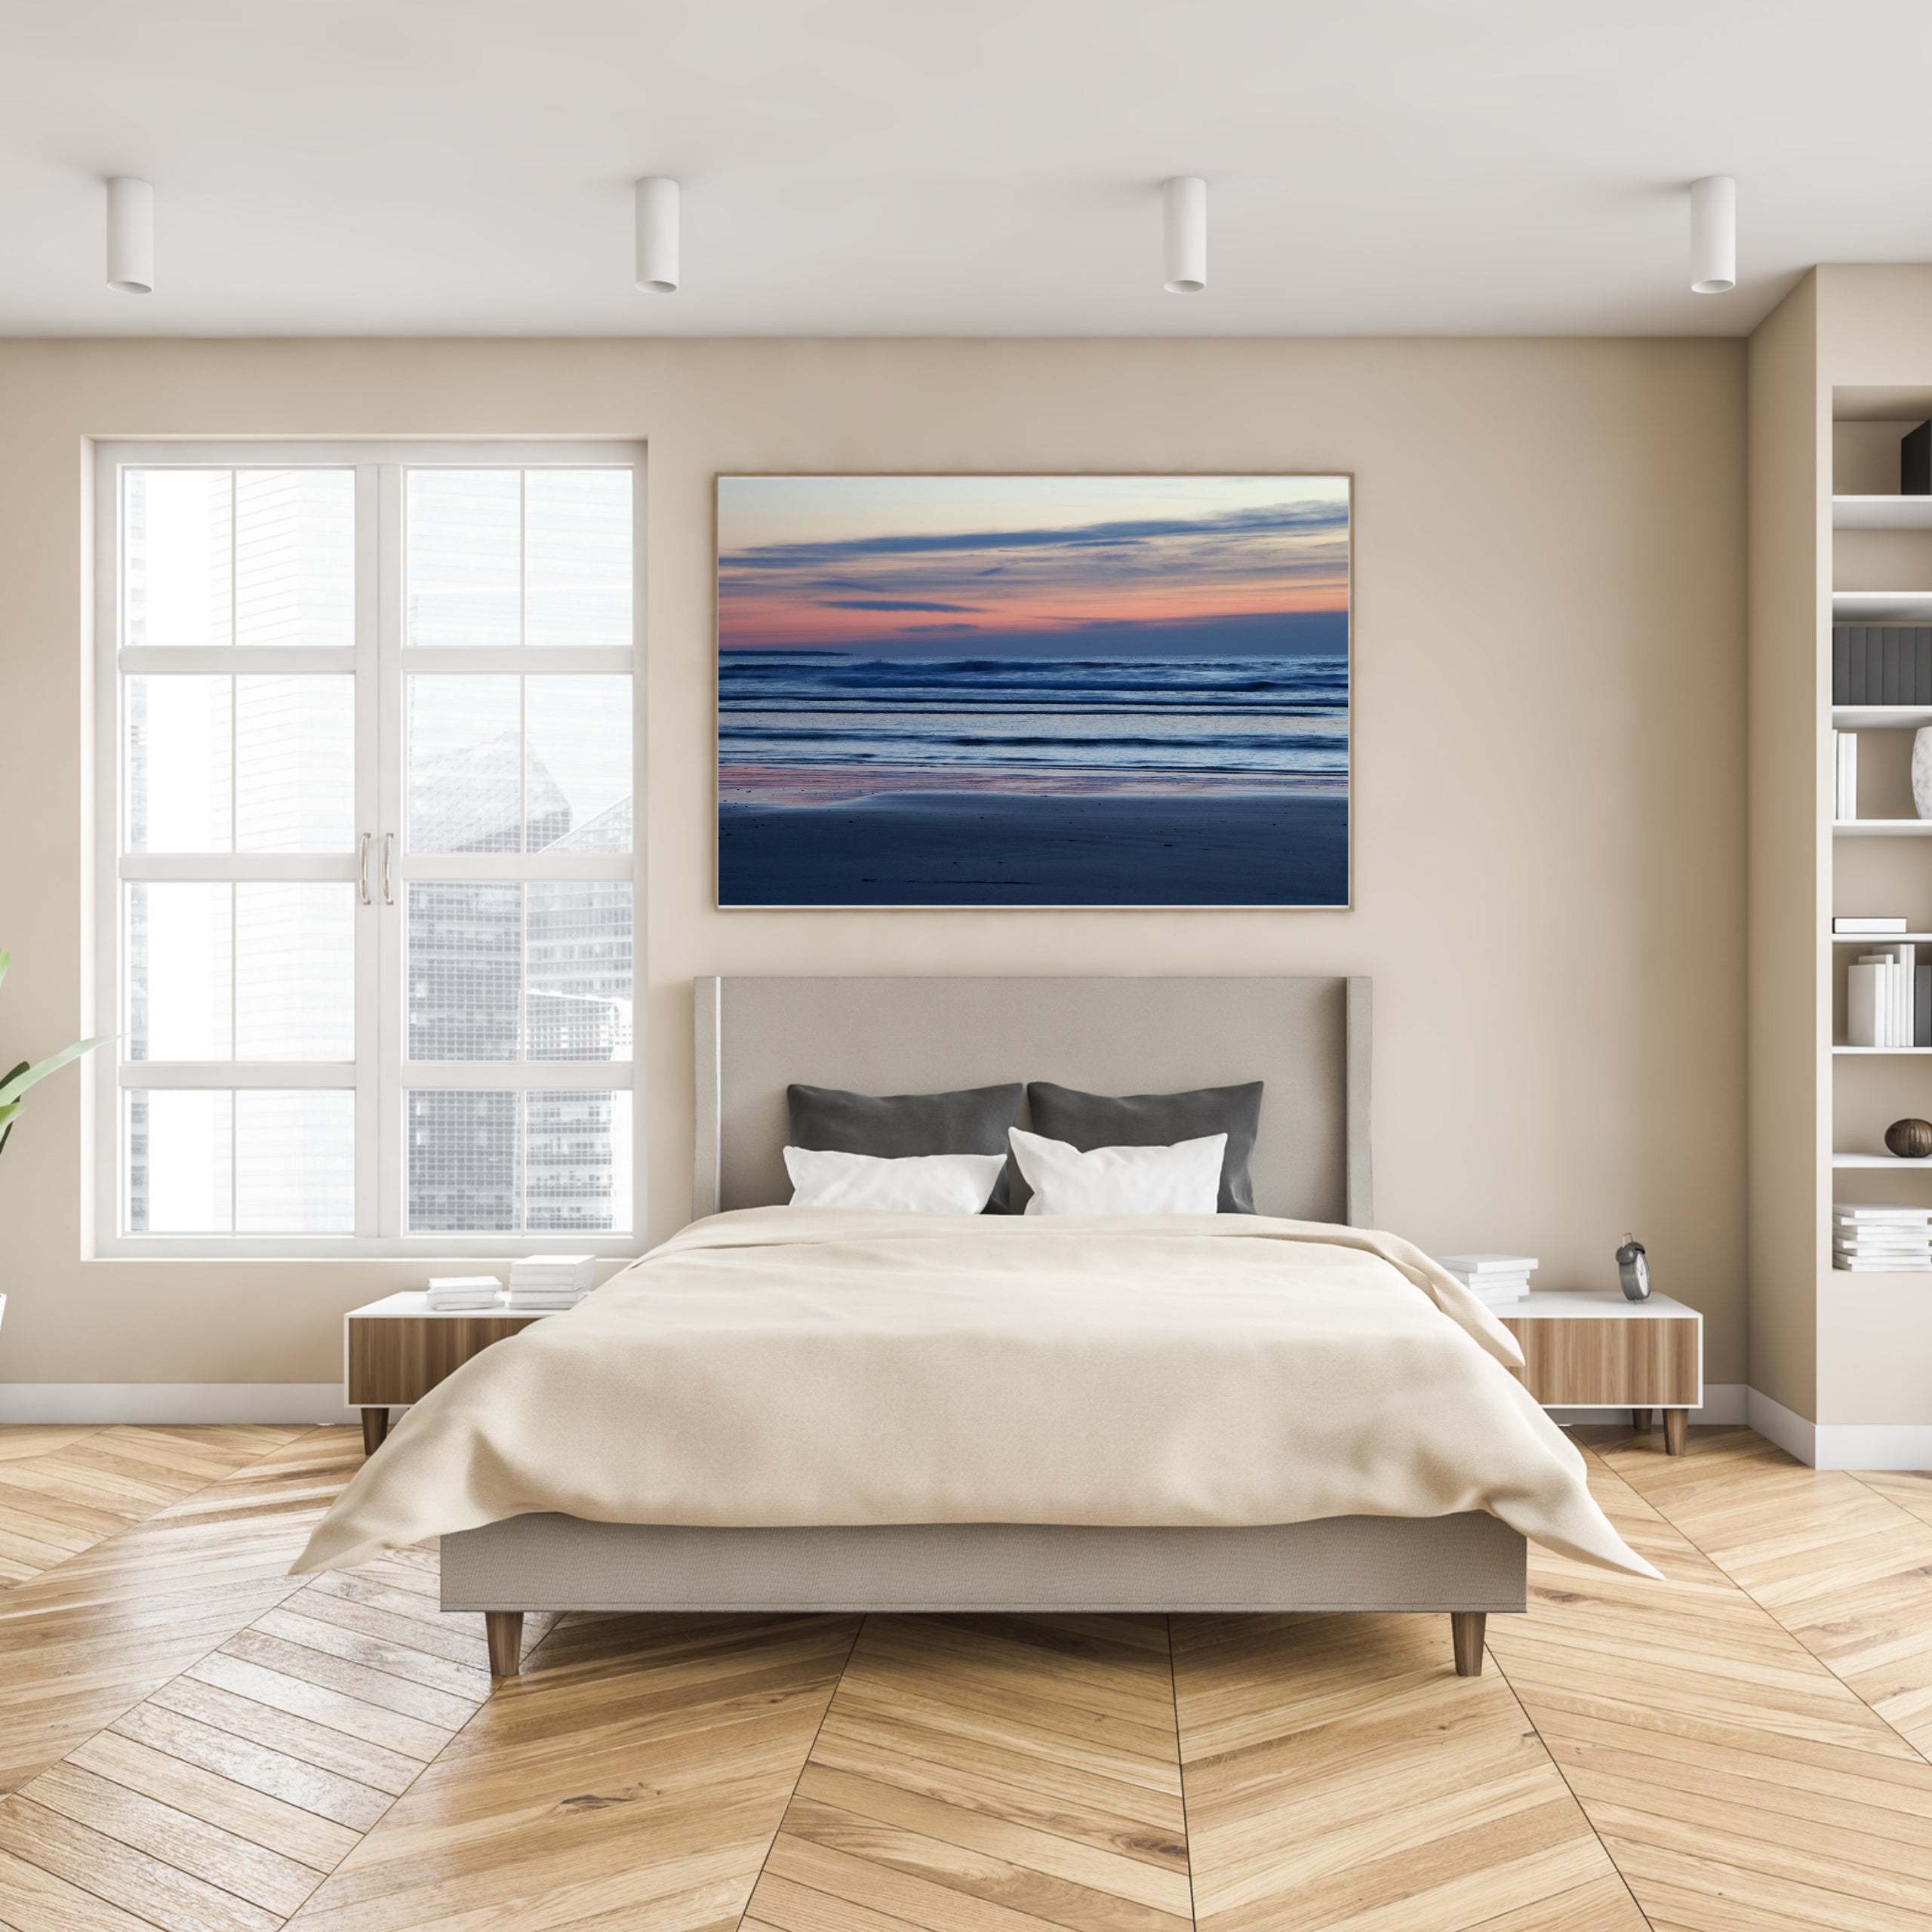 Transform Your Bedroom with Stunning Art -  Creative Ideas and Inspiration